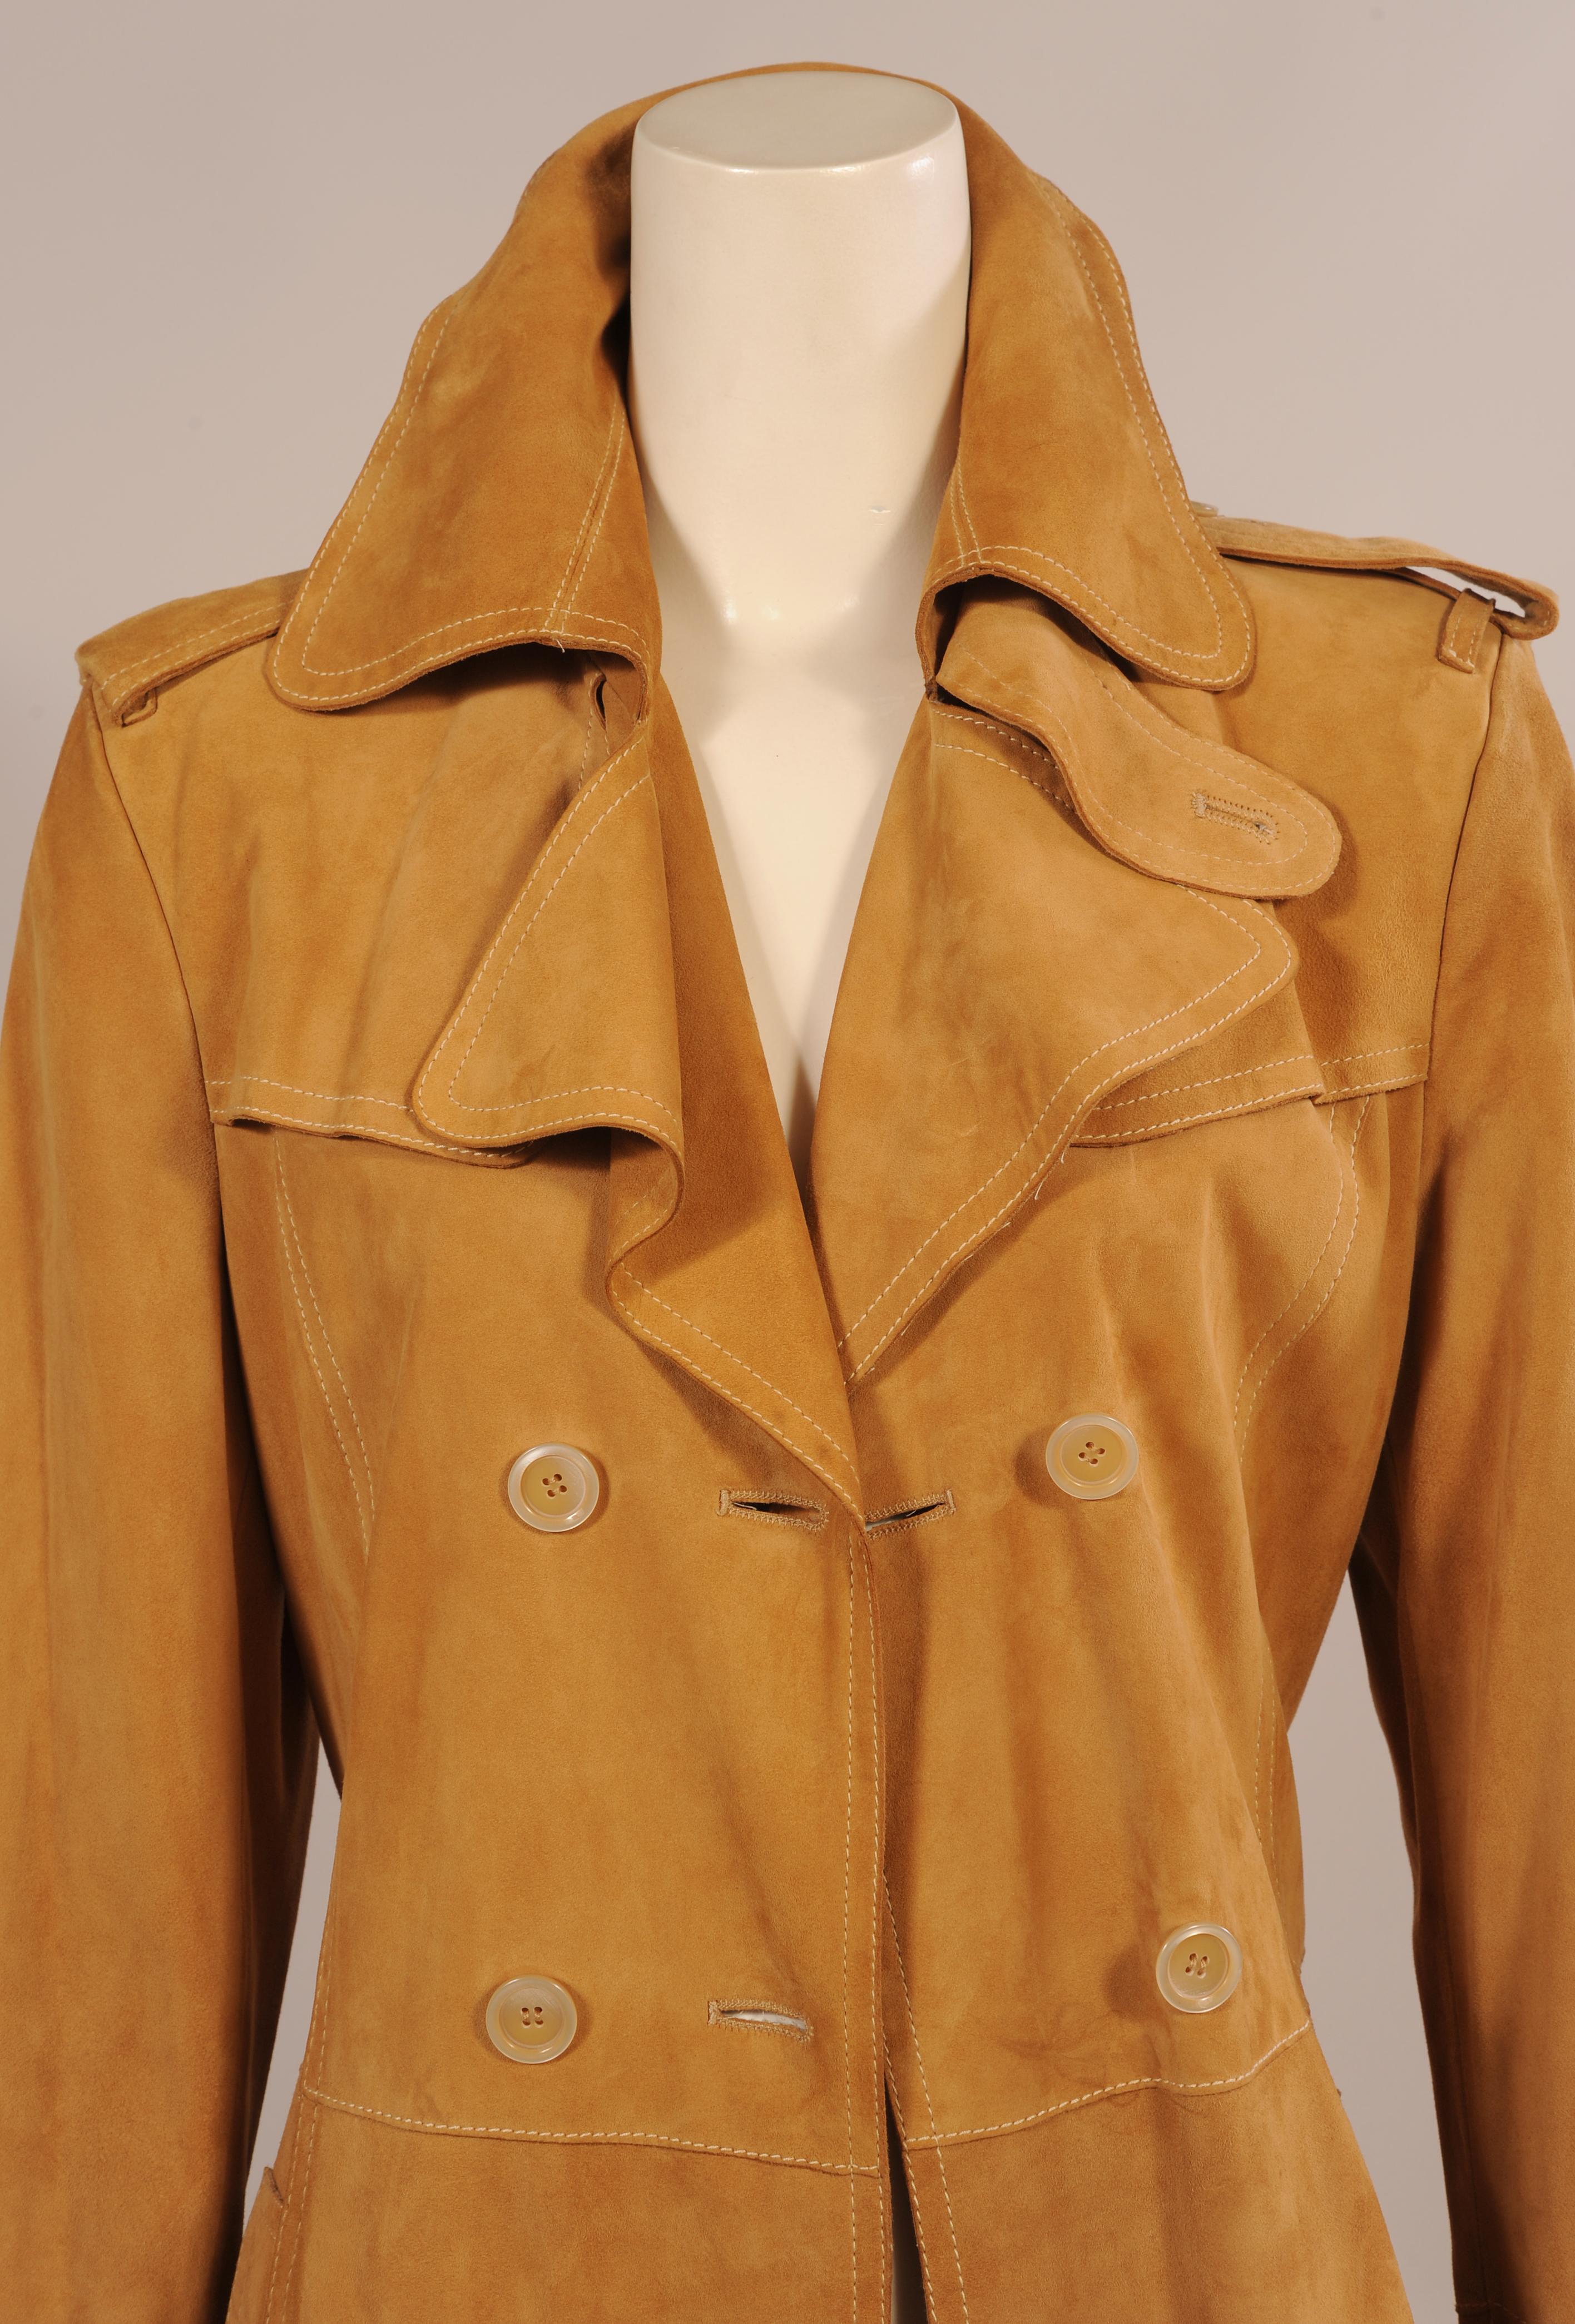 This rich caramel suede coat is designed in the classic trench coat style. Shoulder epaulets, a front yoke and a tie belt are all emblematic of the style. It is double breasted and there are two pockets. The coat is in excellent